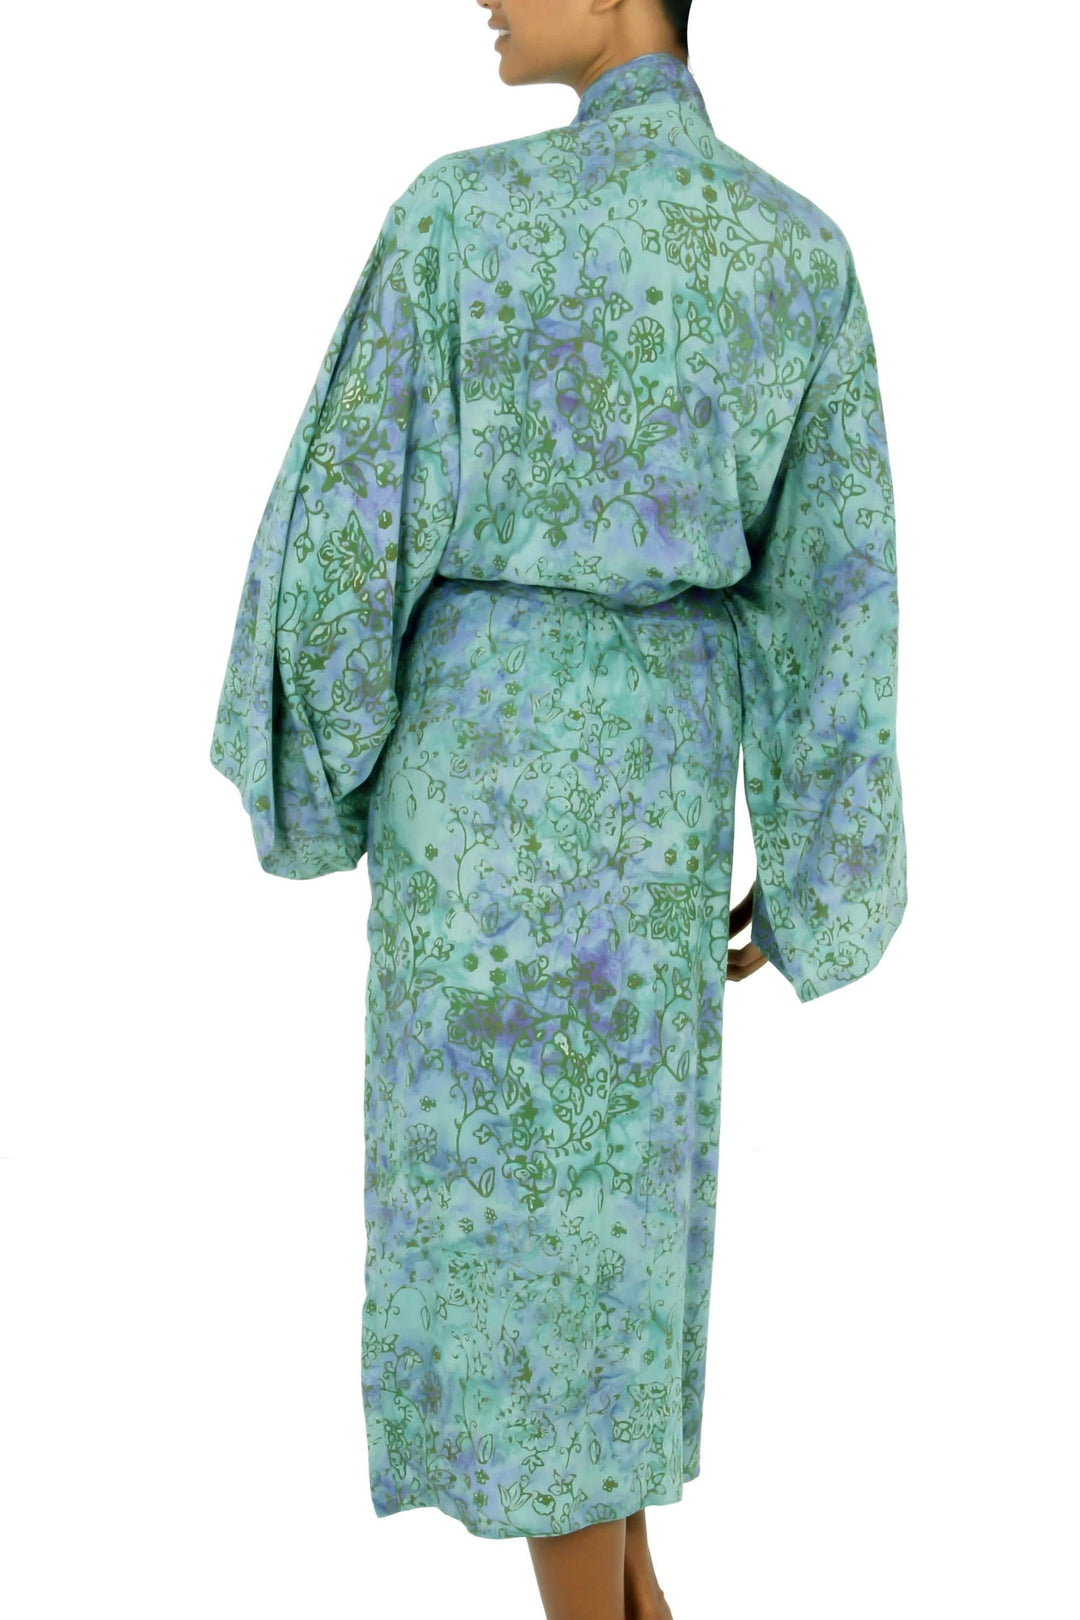 Rayon Batik Maxi Dress with Mint Floral Pattern Made in Bali, 'Mint Garden